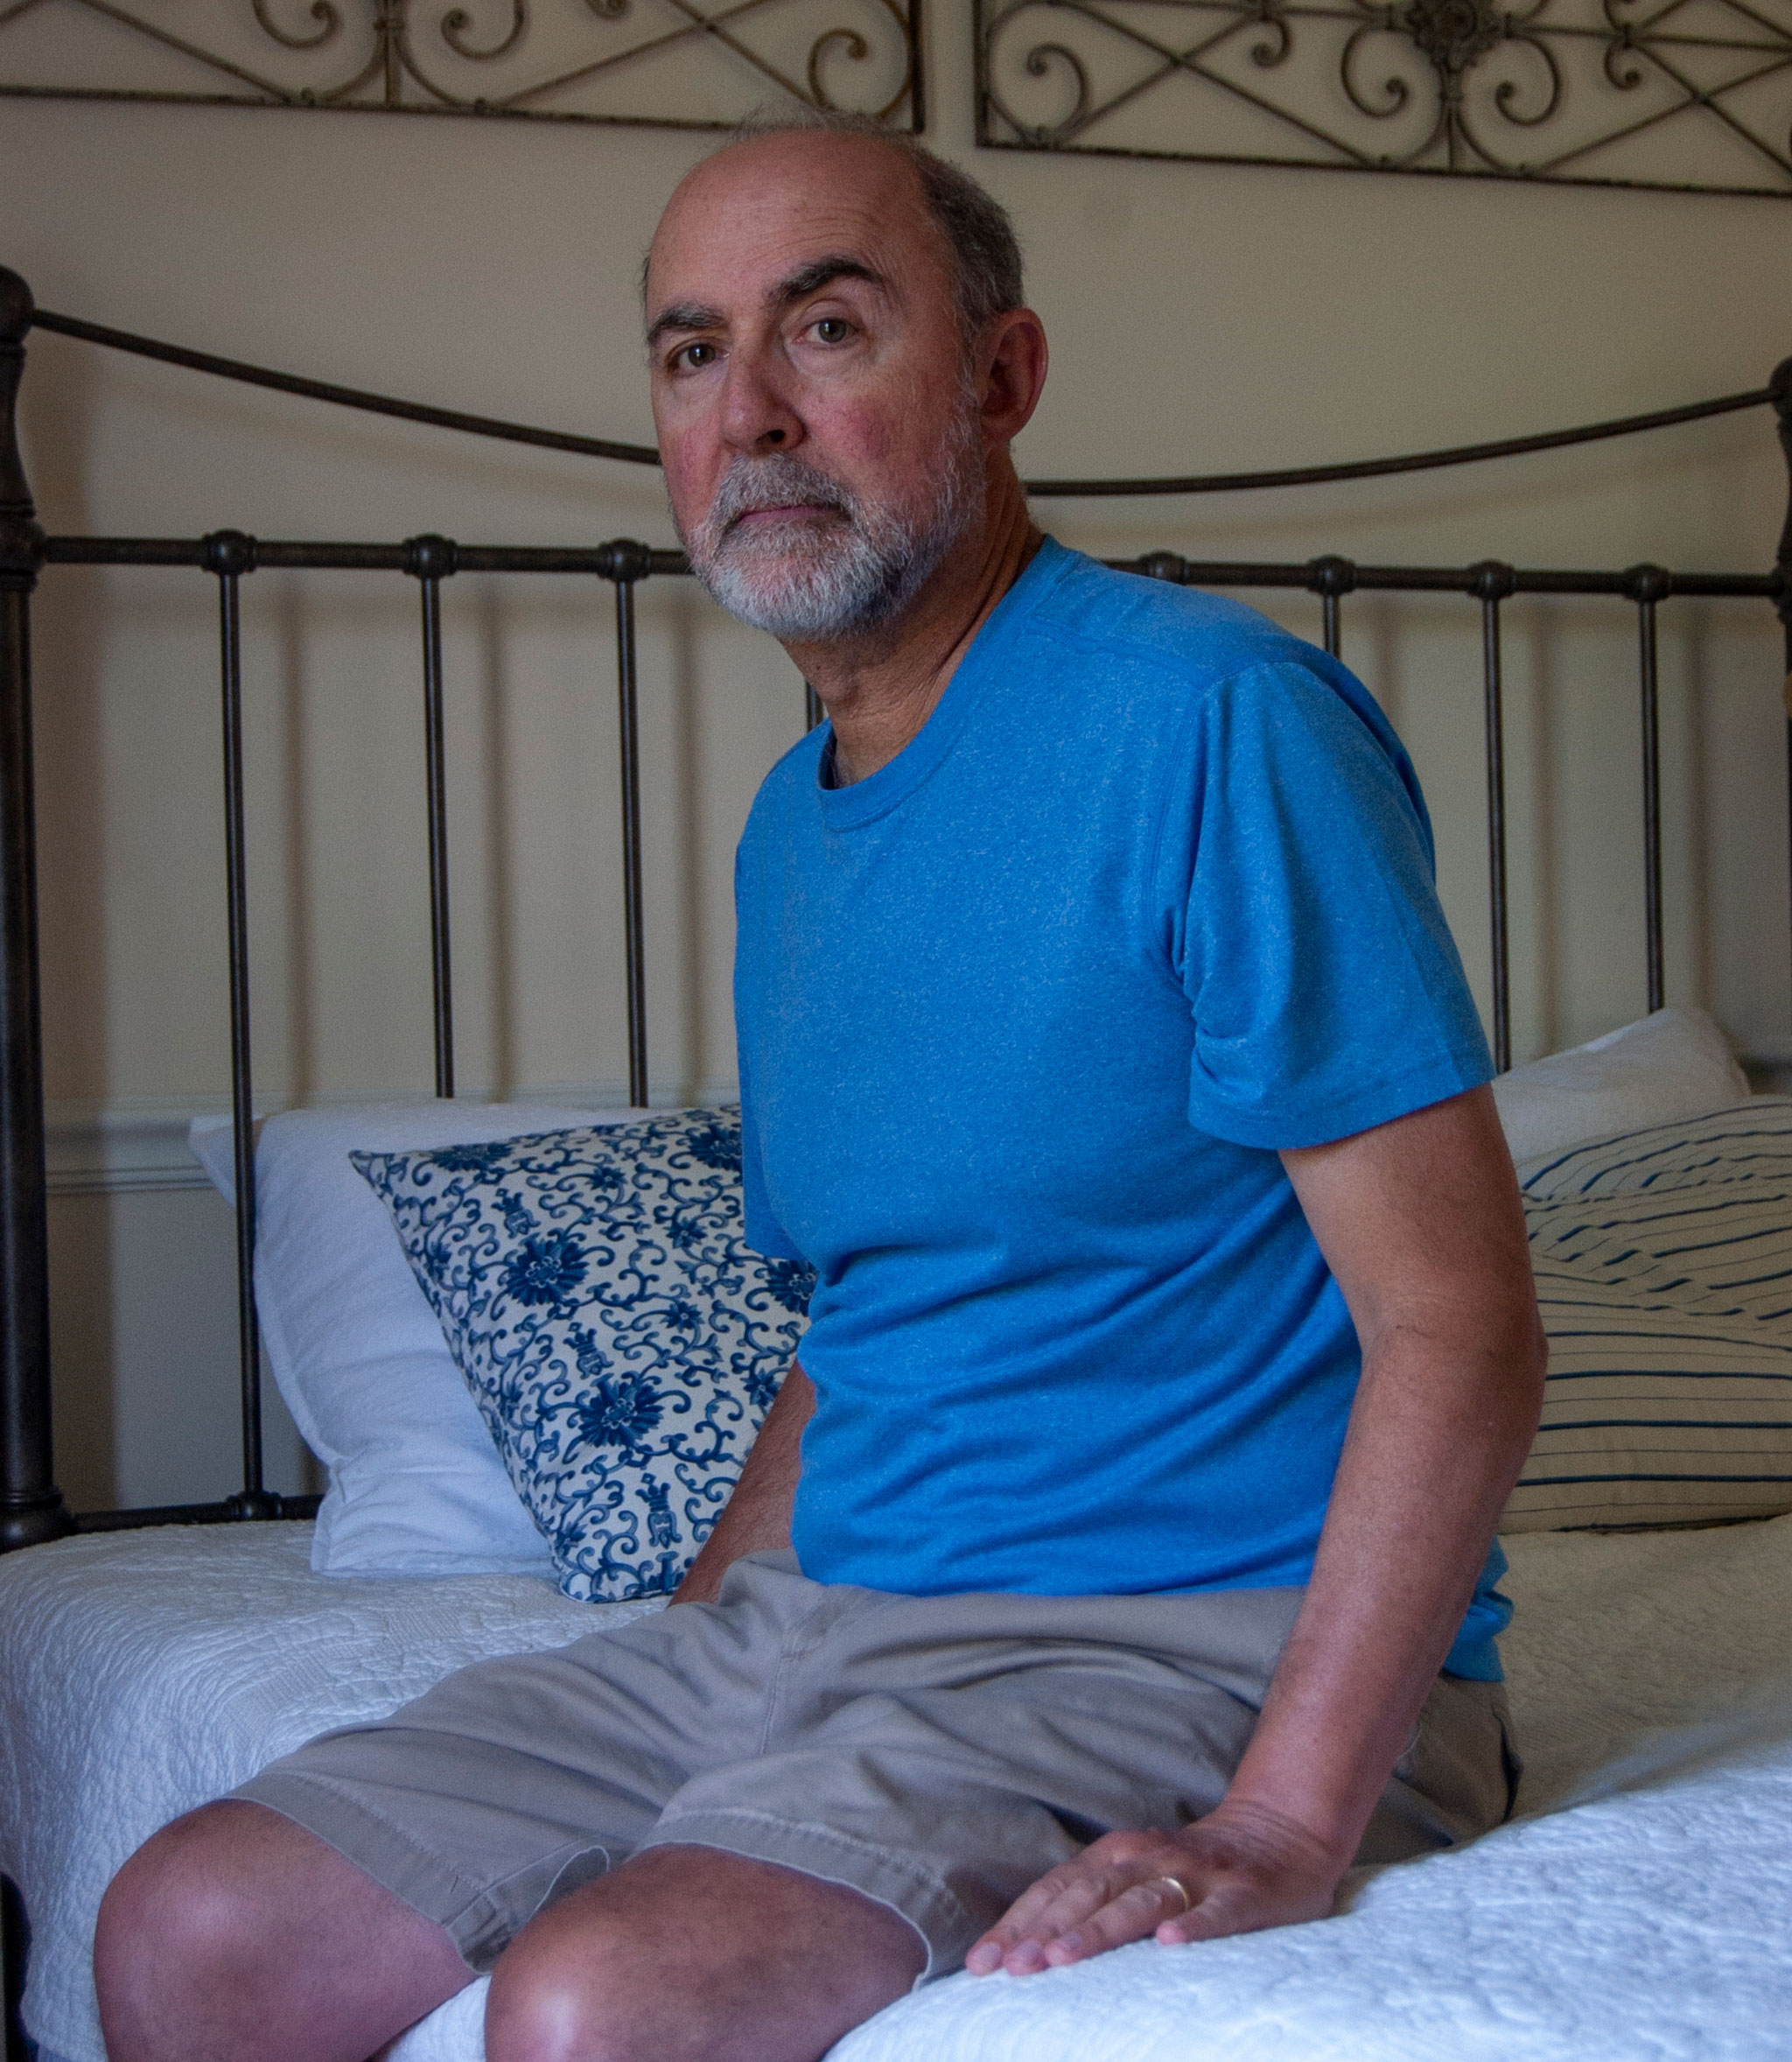 A man in a blue t-shirt sits on a bed and looks at the camera.